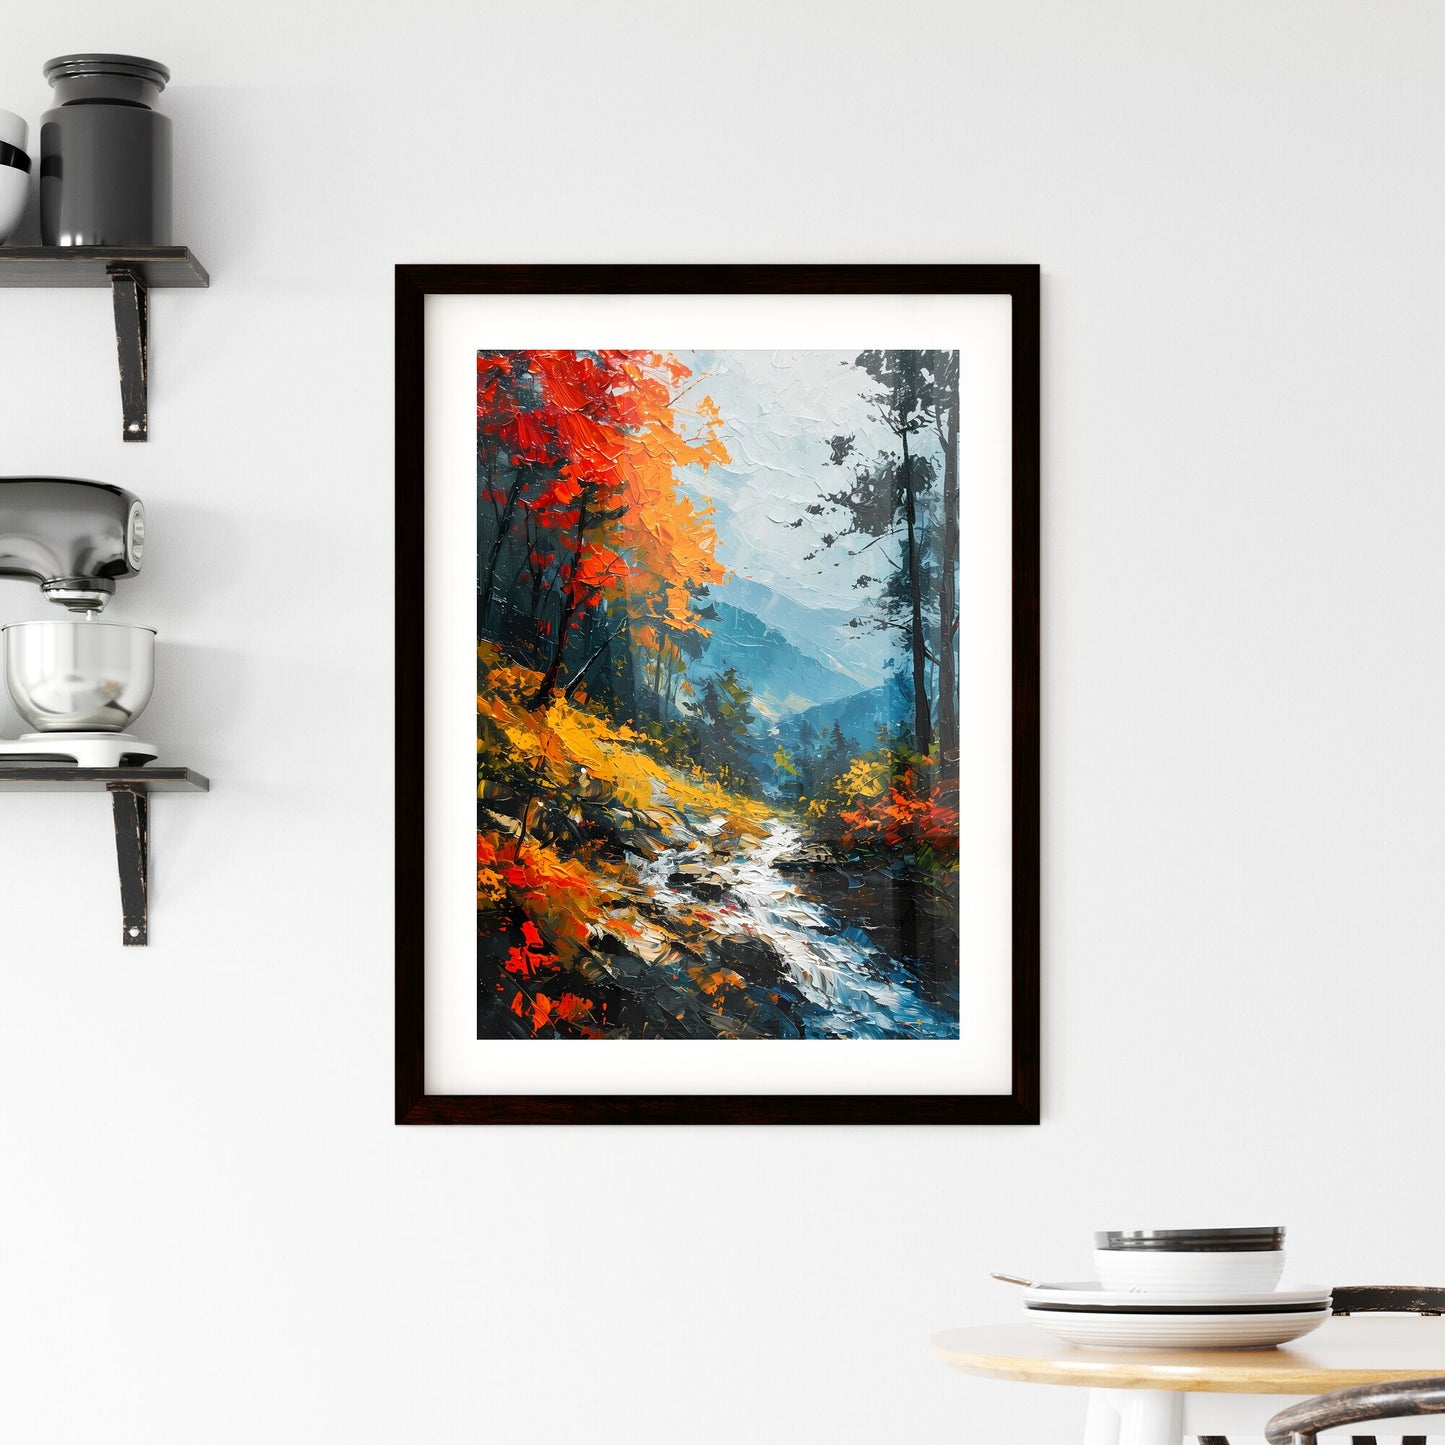 A Poster of Waterfalls landscape - A Painting Of A River Running Through A Forest Default Title